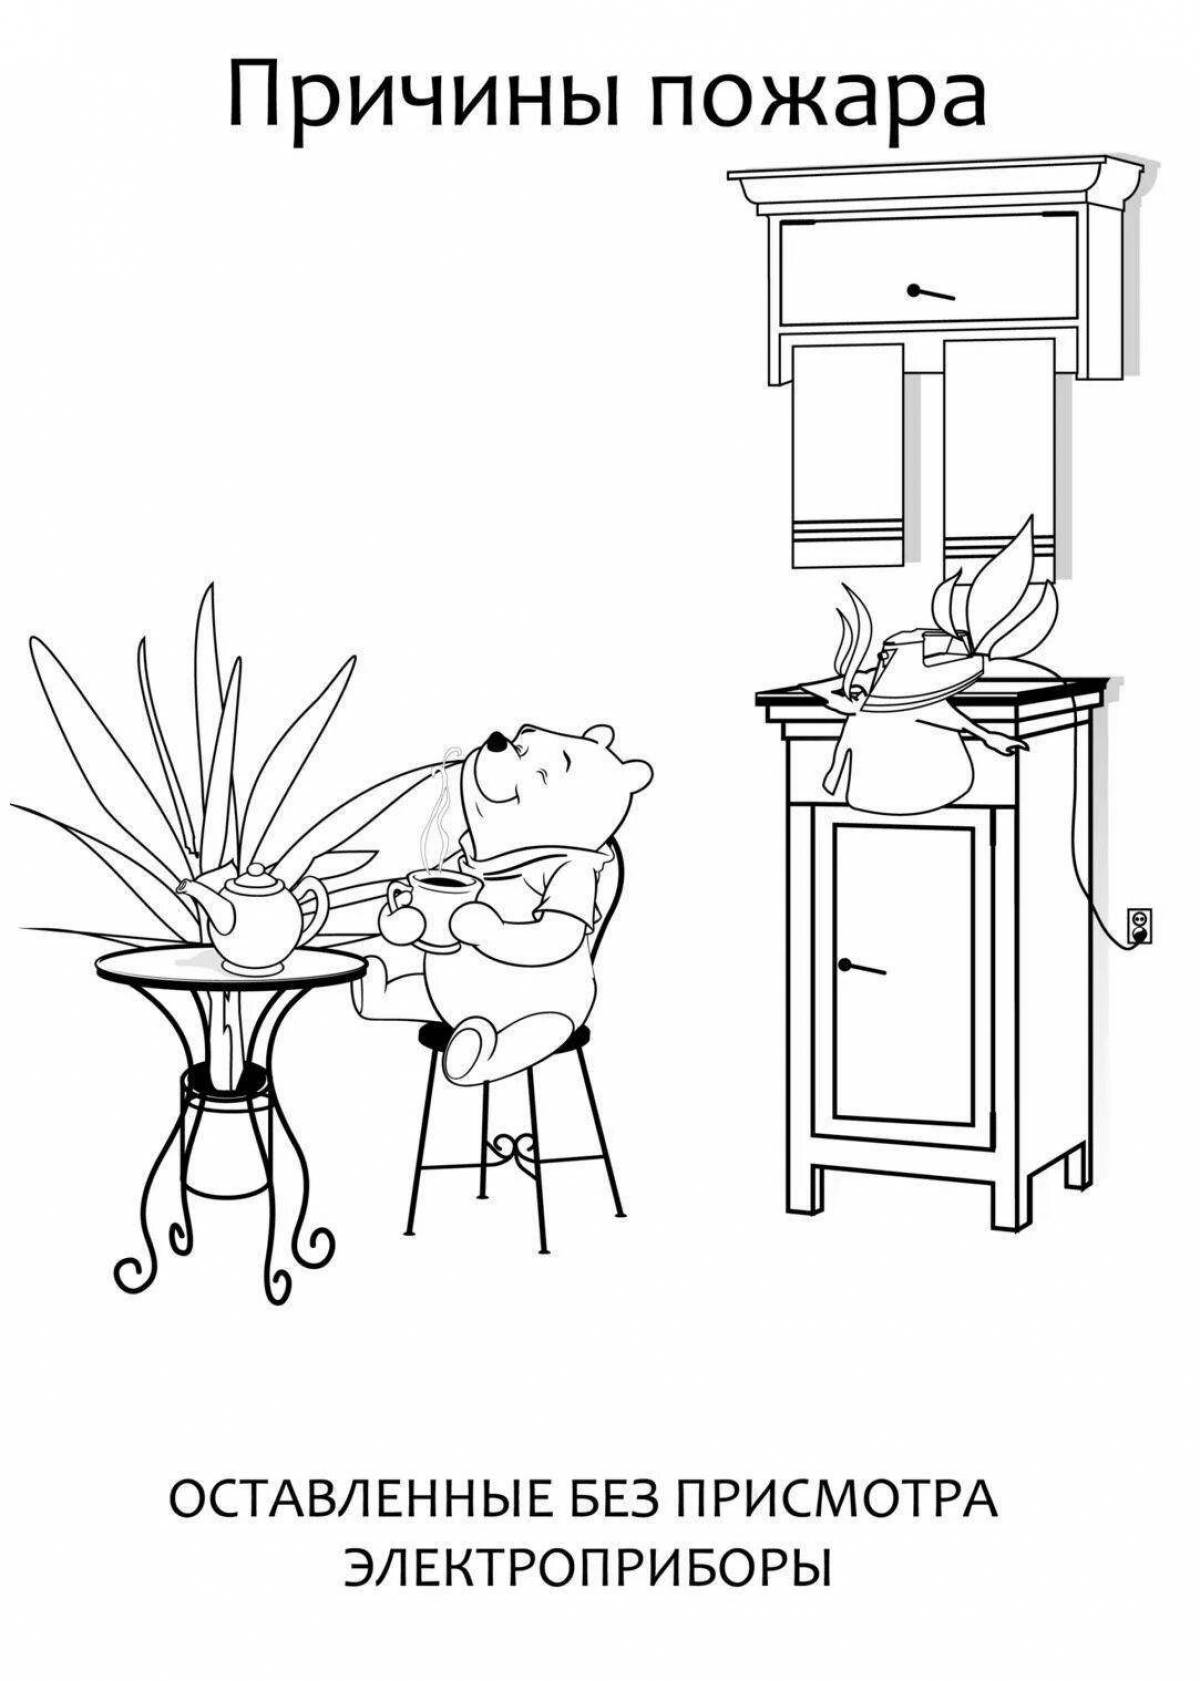 Colorful bright home security coloring page